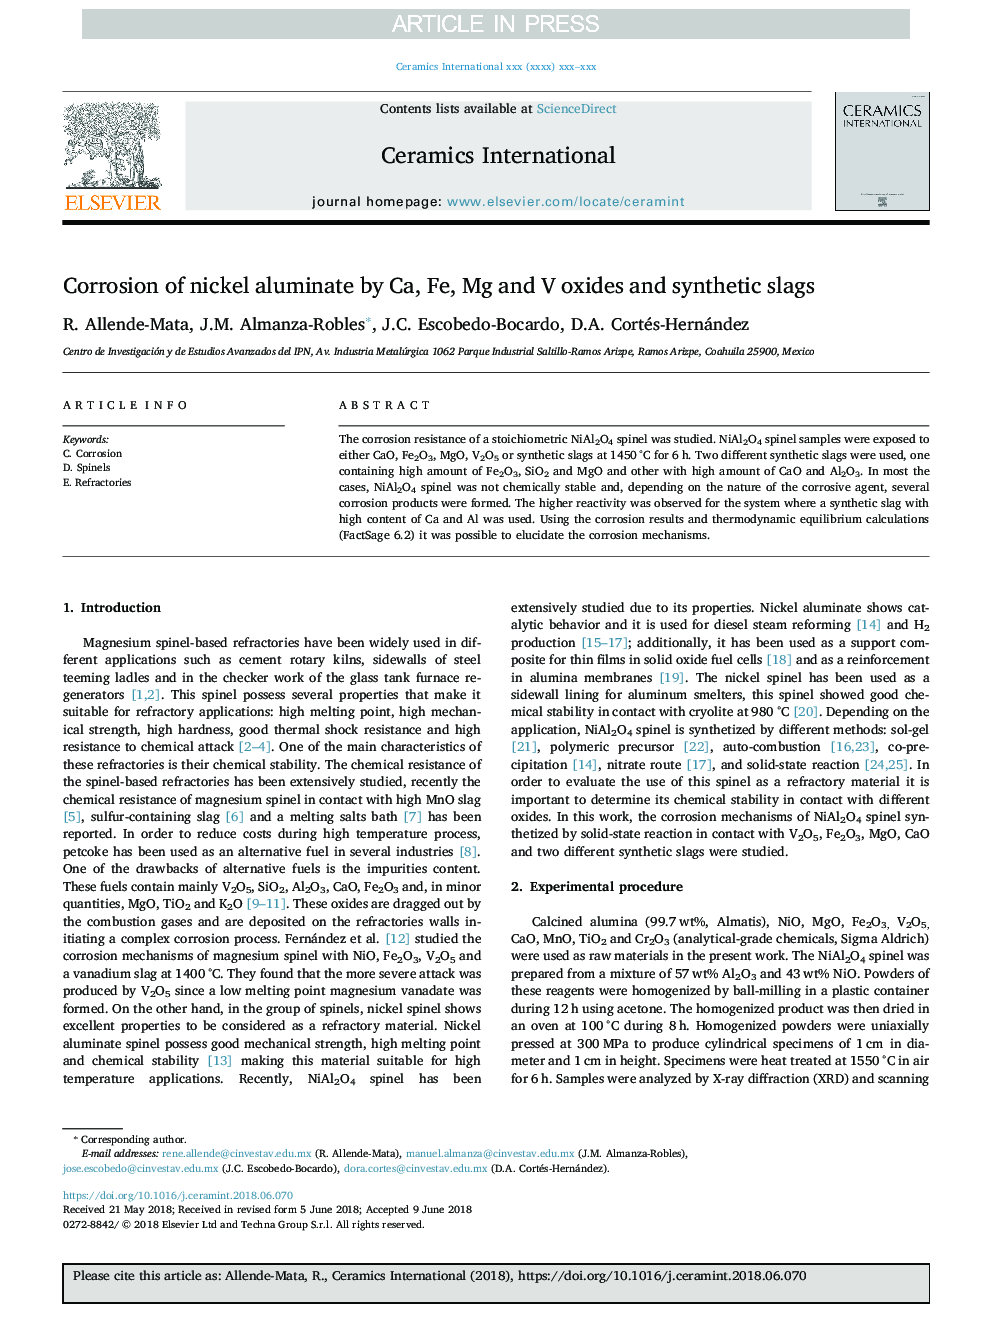 Corrosion of nickel aluminate by Ca, Fe, Mg and V oxides and synthetic slags